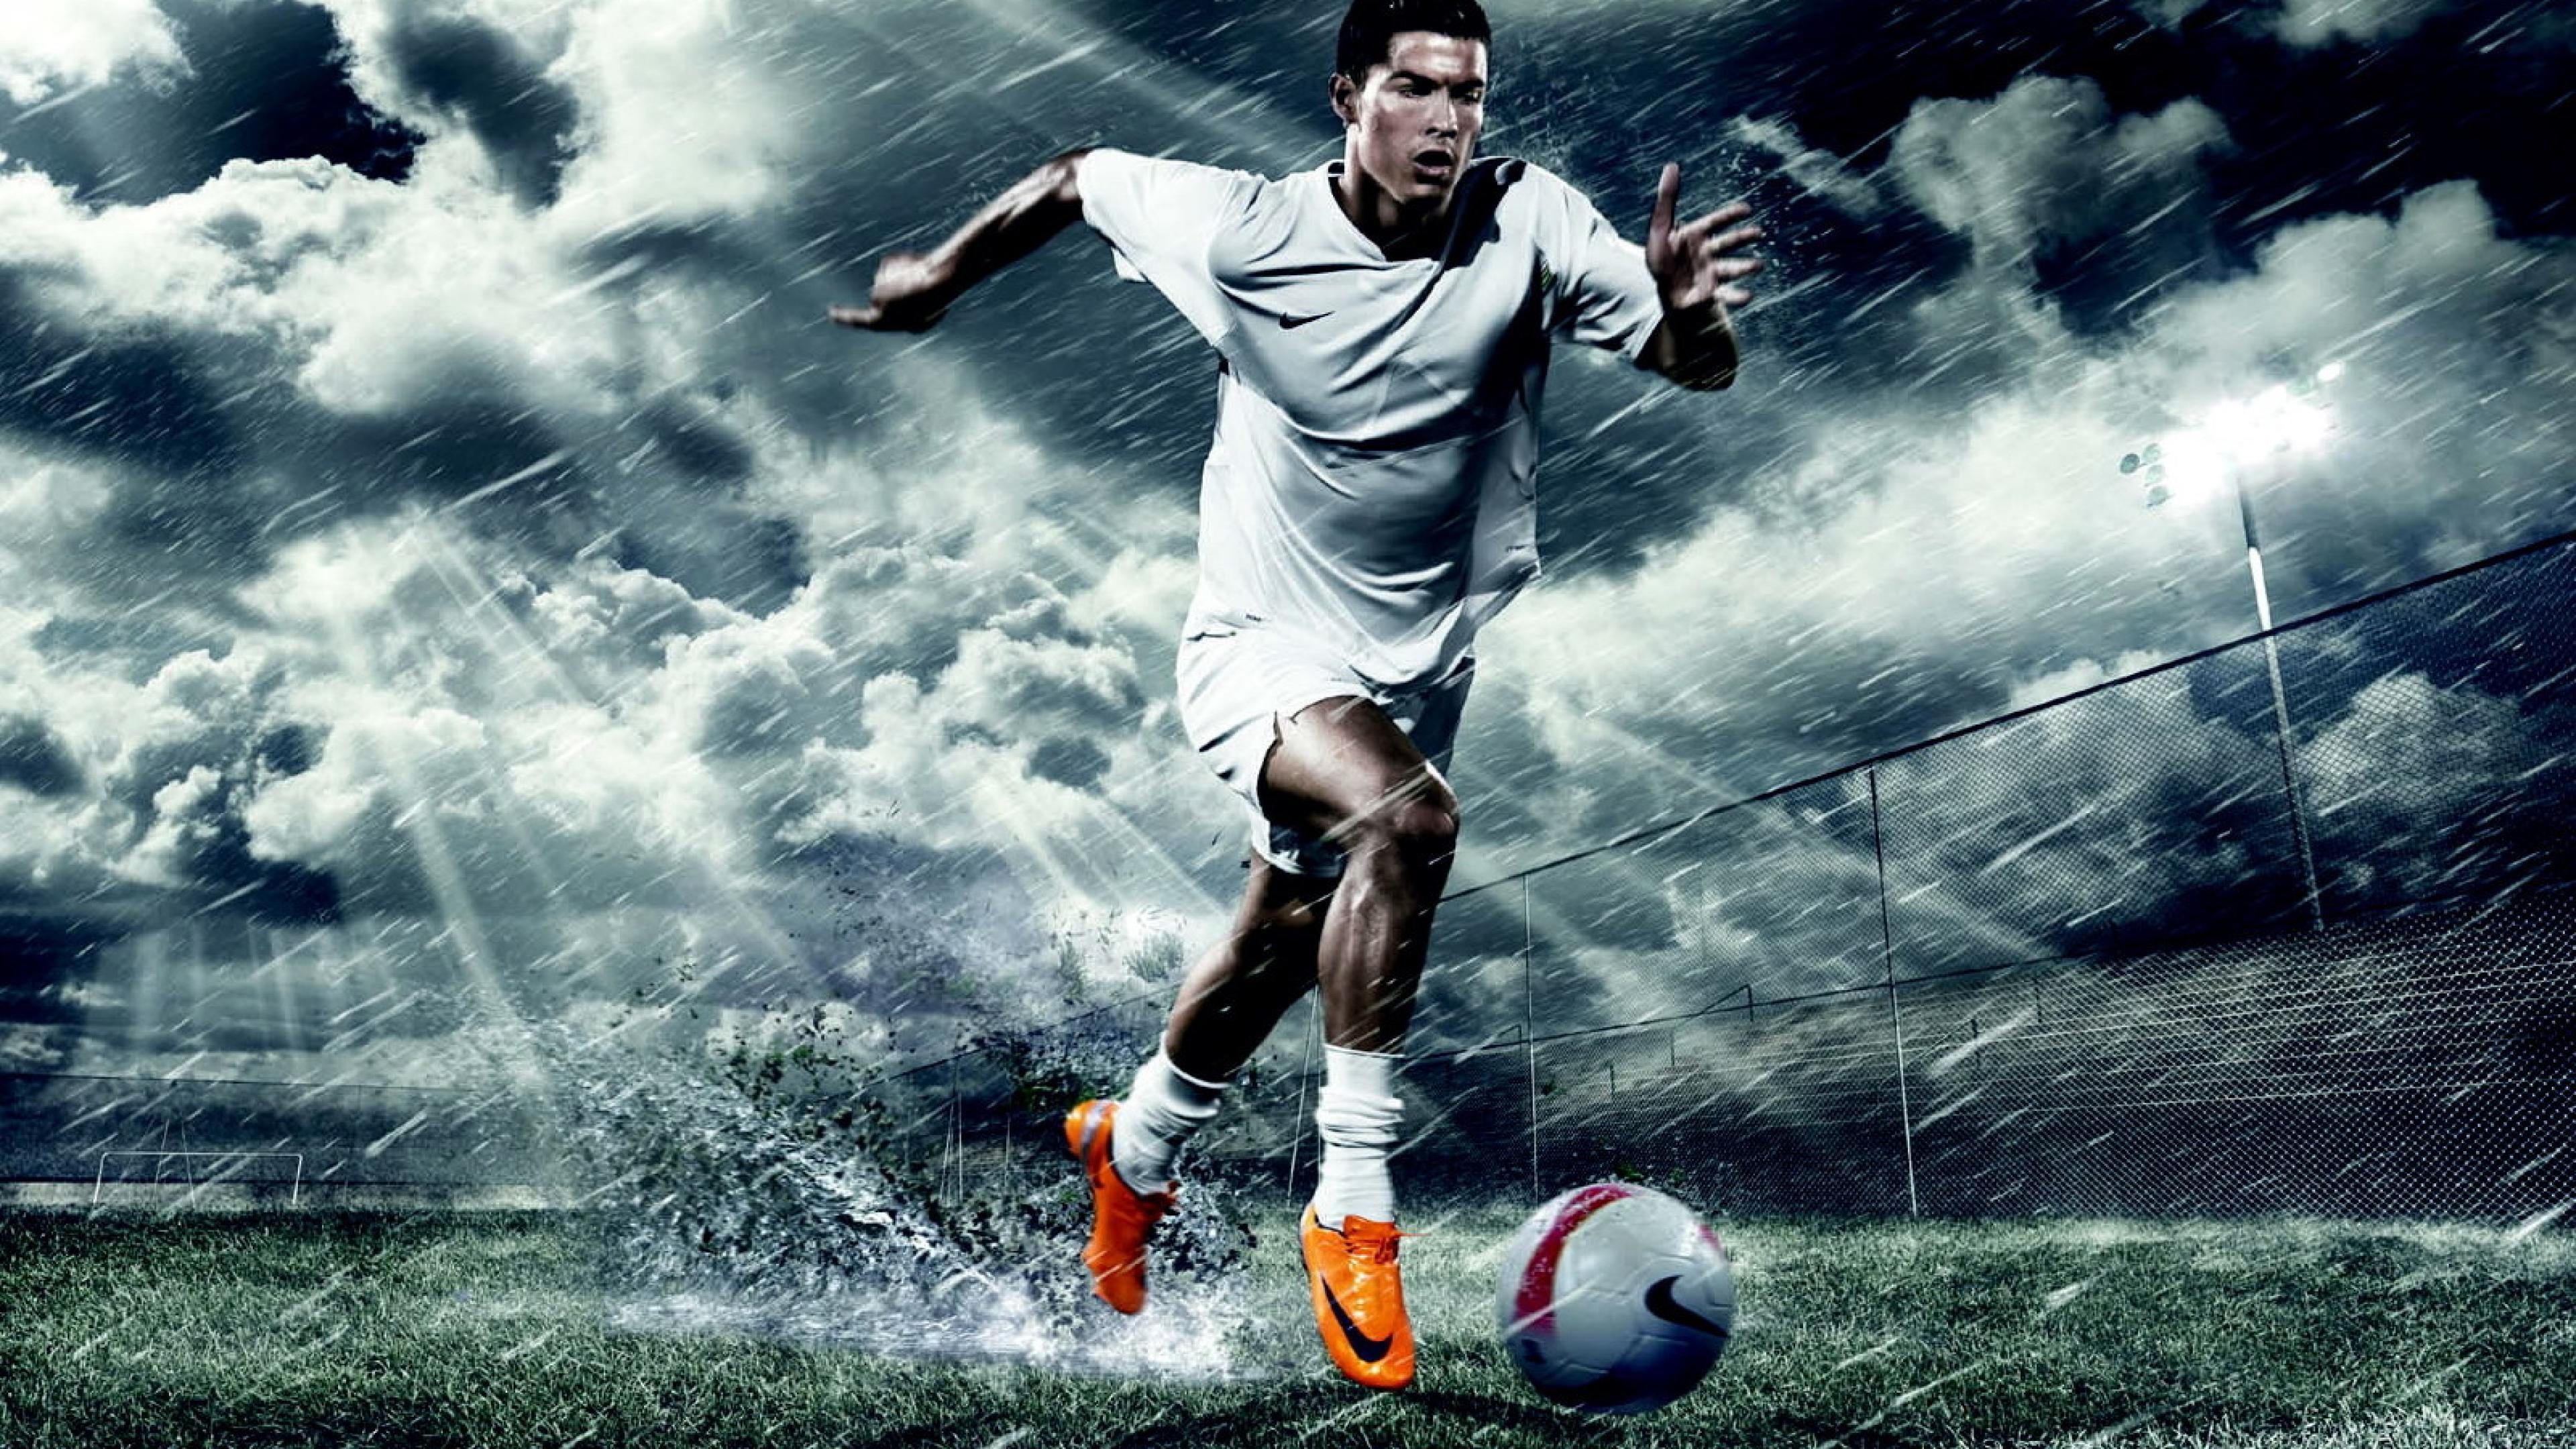 soccer wallpaper for phone, soccer wallpapers for iphone 5